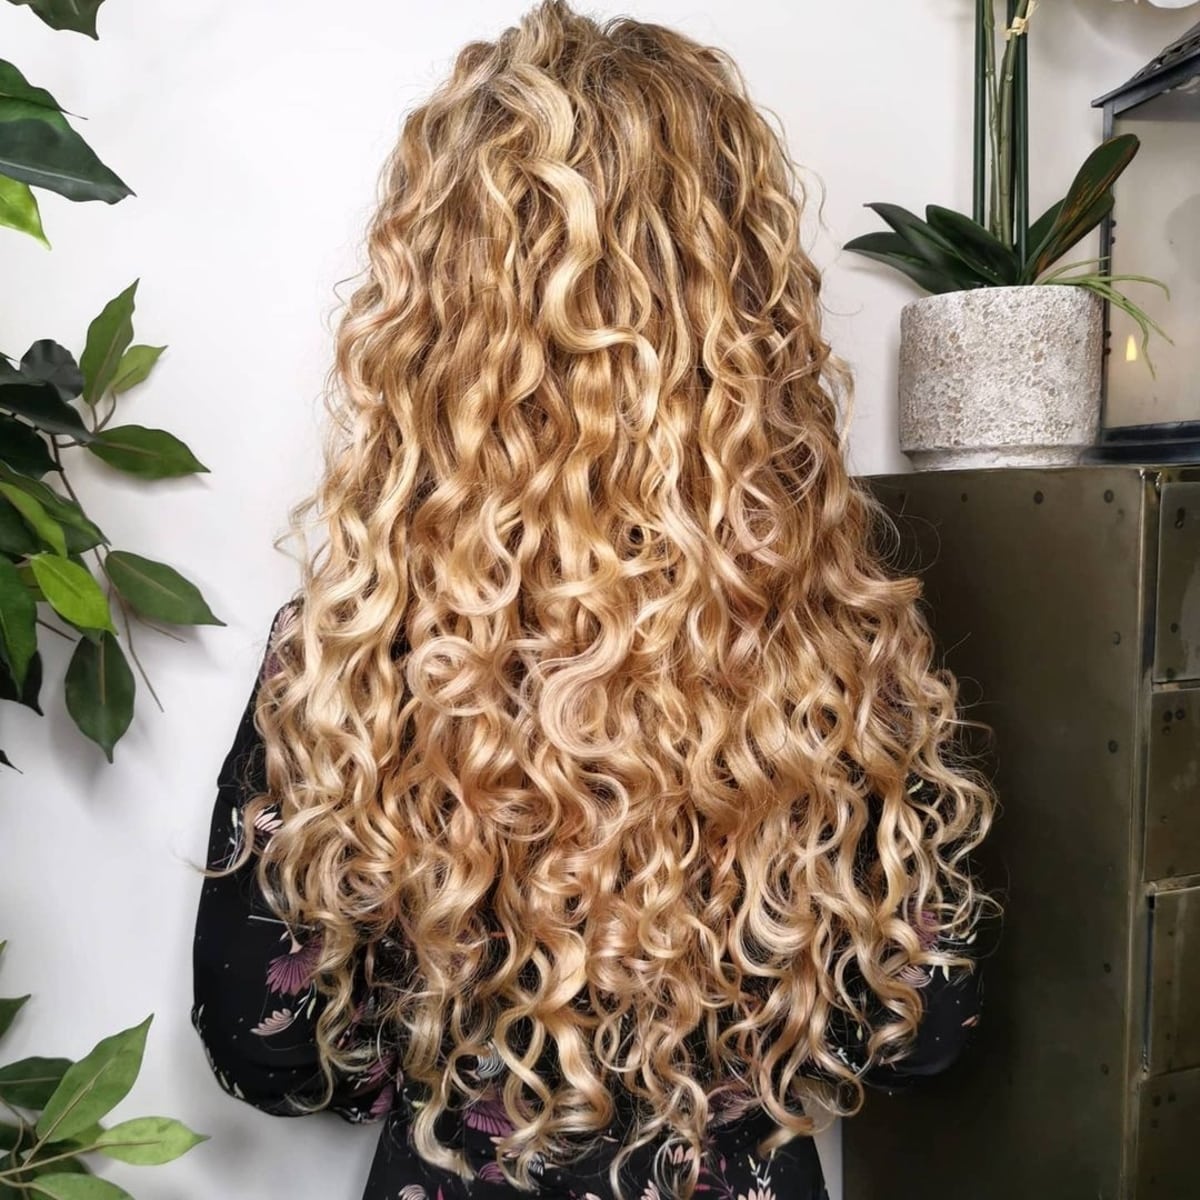 Long curly ponytail style